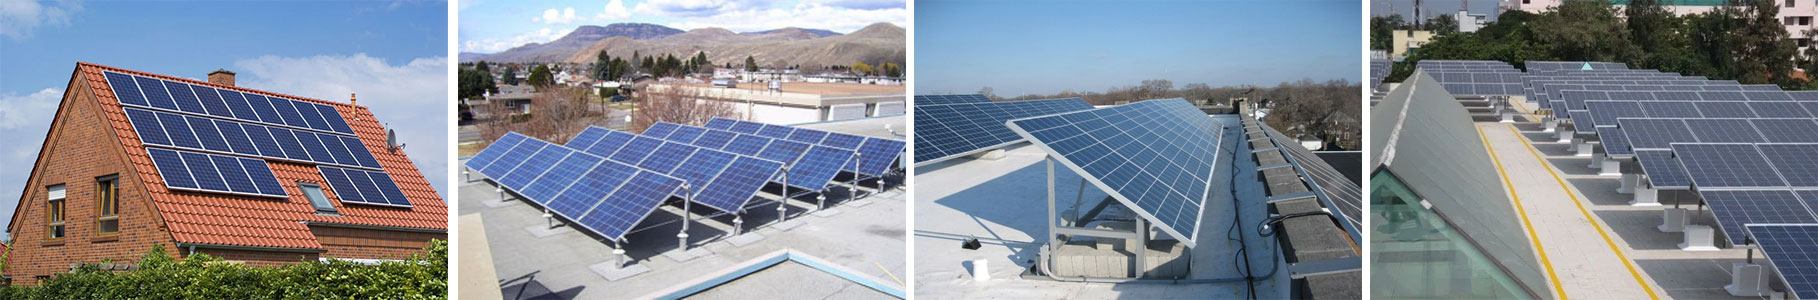 Roof Top Solar Systems